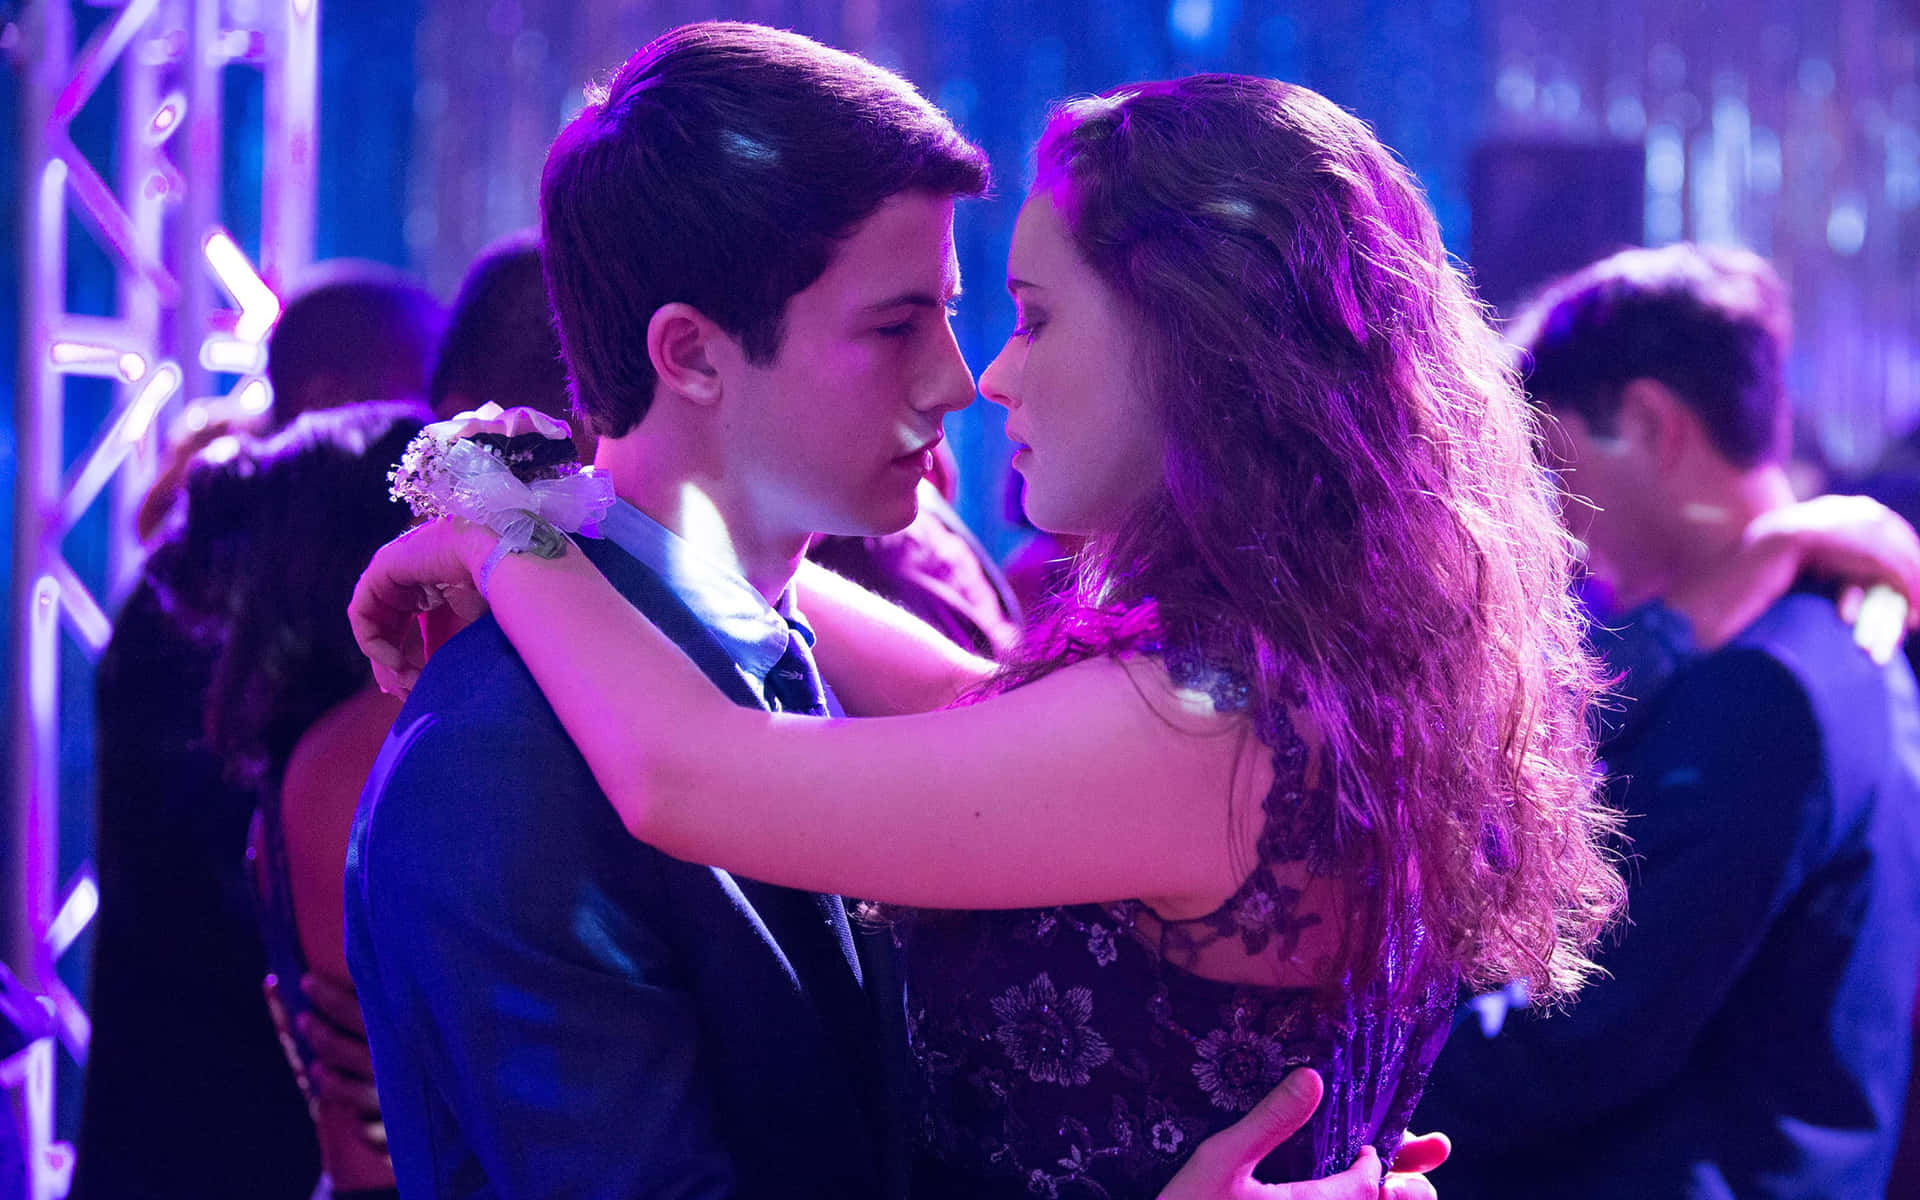 Dance the night away at this classic 80s-style prom!